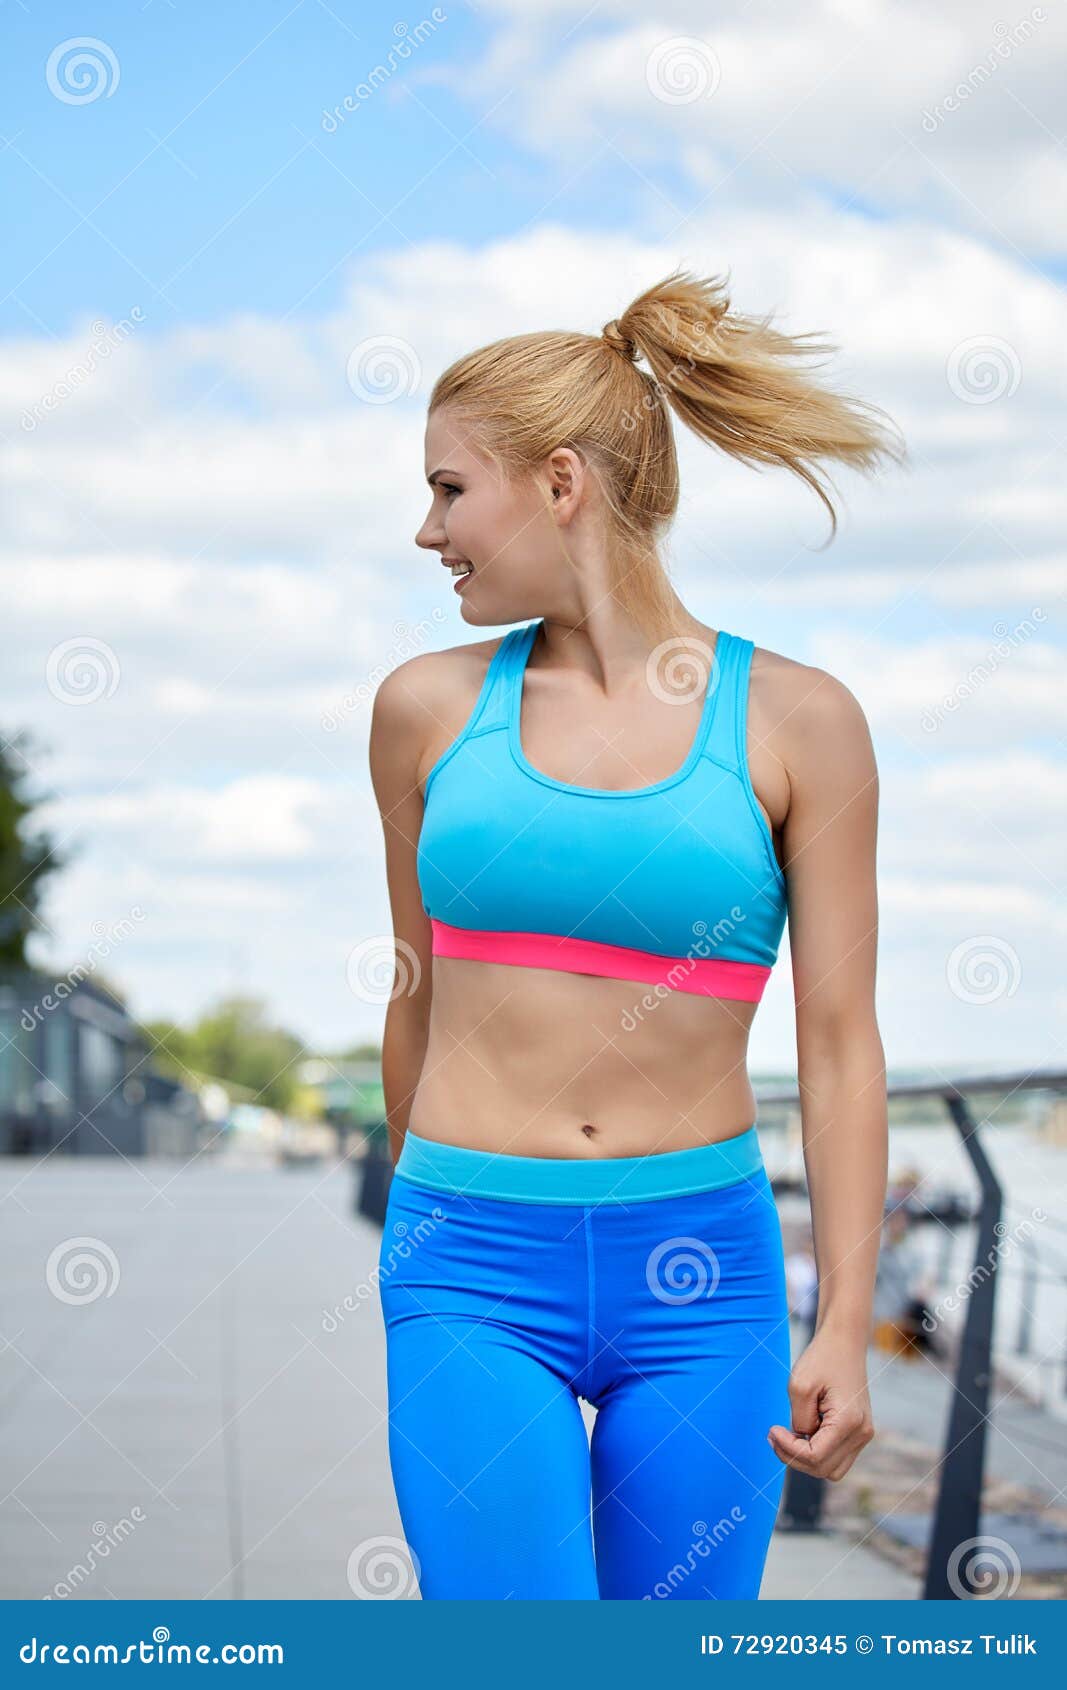 Athlete Women S Sportswear Fit Thin Physique Athletic Build Stock Image -  Image of confident, determination: 72920345